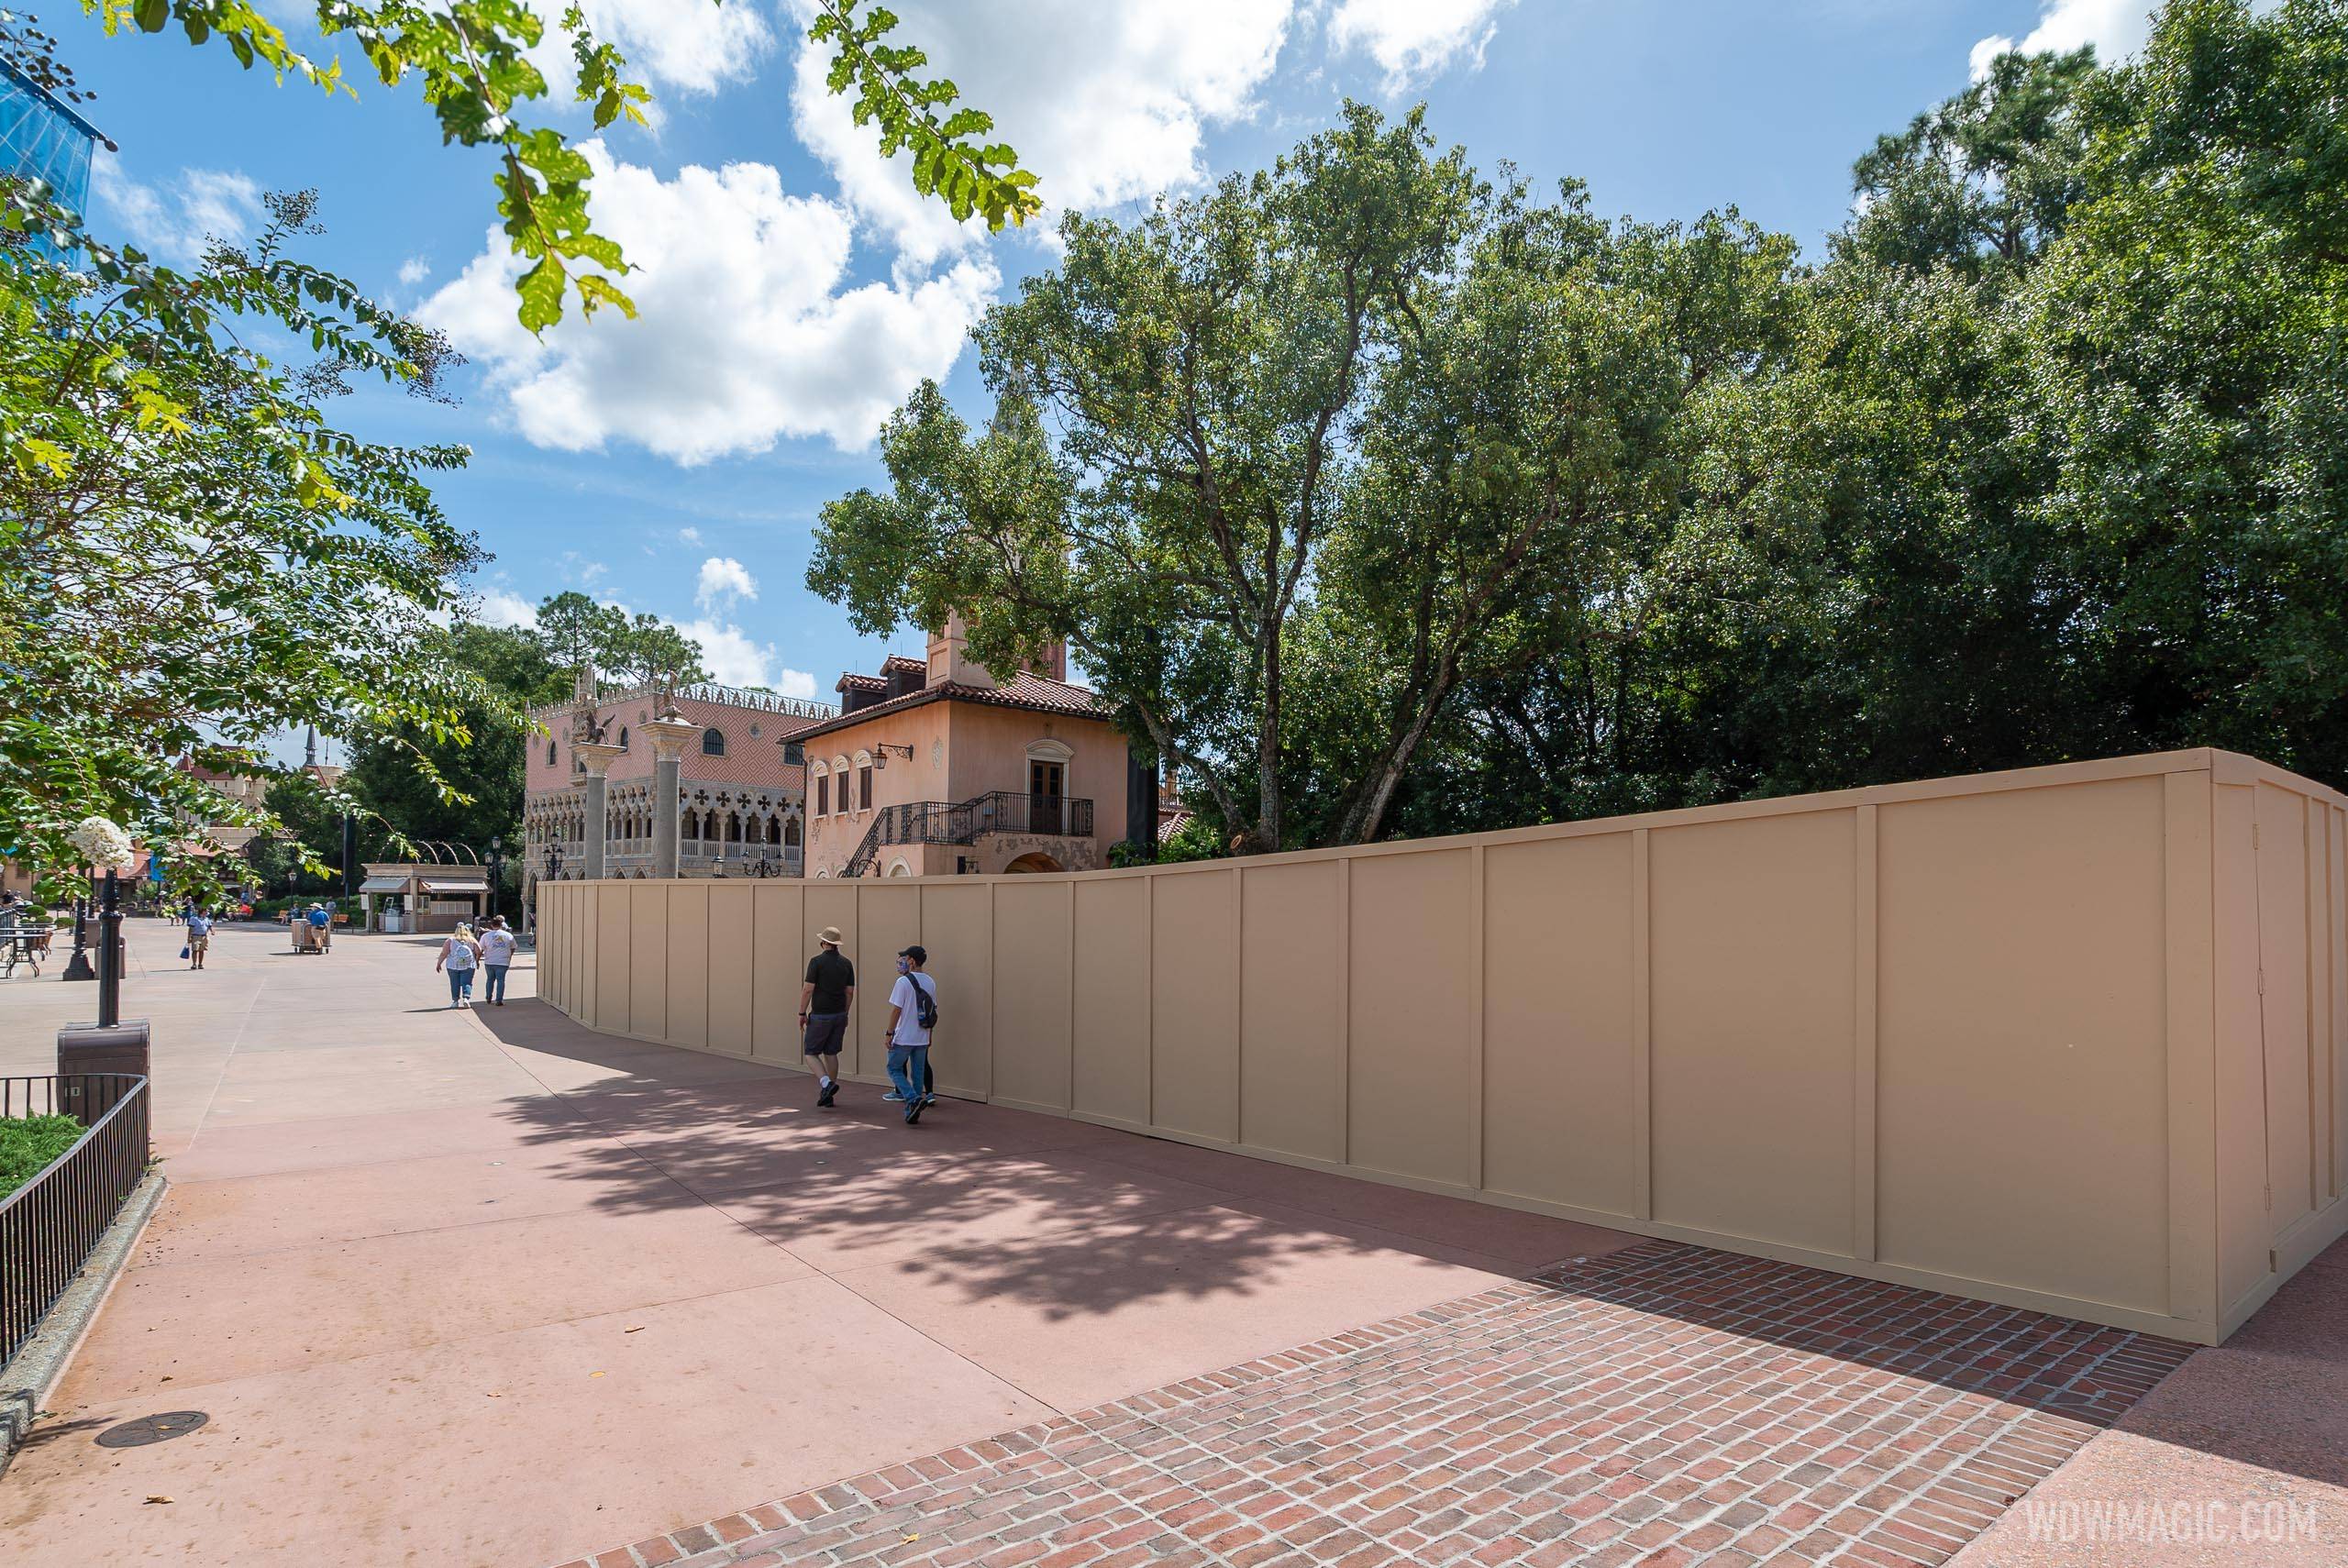 PHOTOS - 'La Gelateria' coming to the Italy pavilion in EPCOT's World Showcase